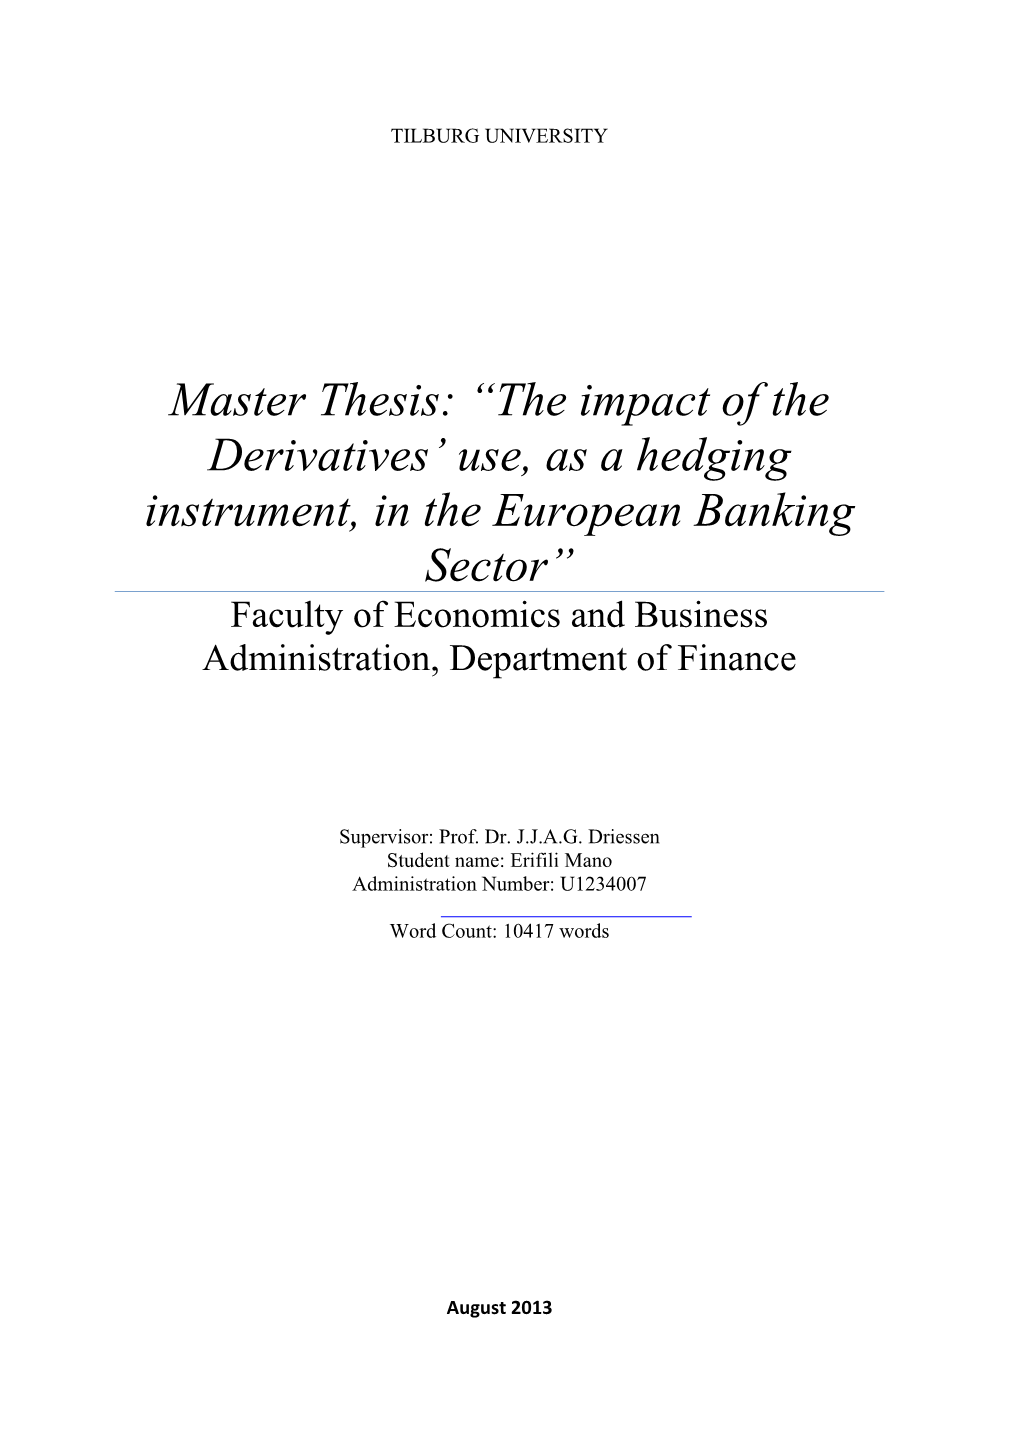 Master Thesis: “The Impact of the Derivatives' Use, As a Hedging